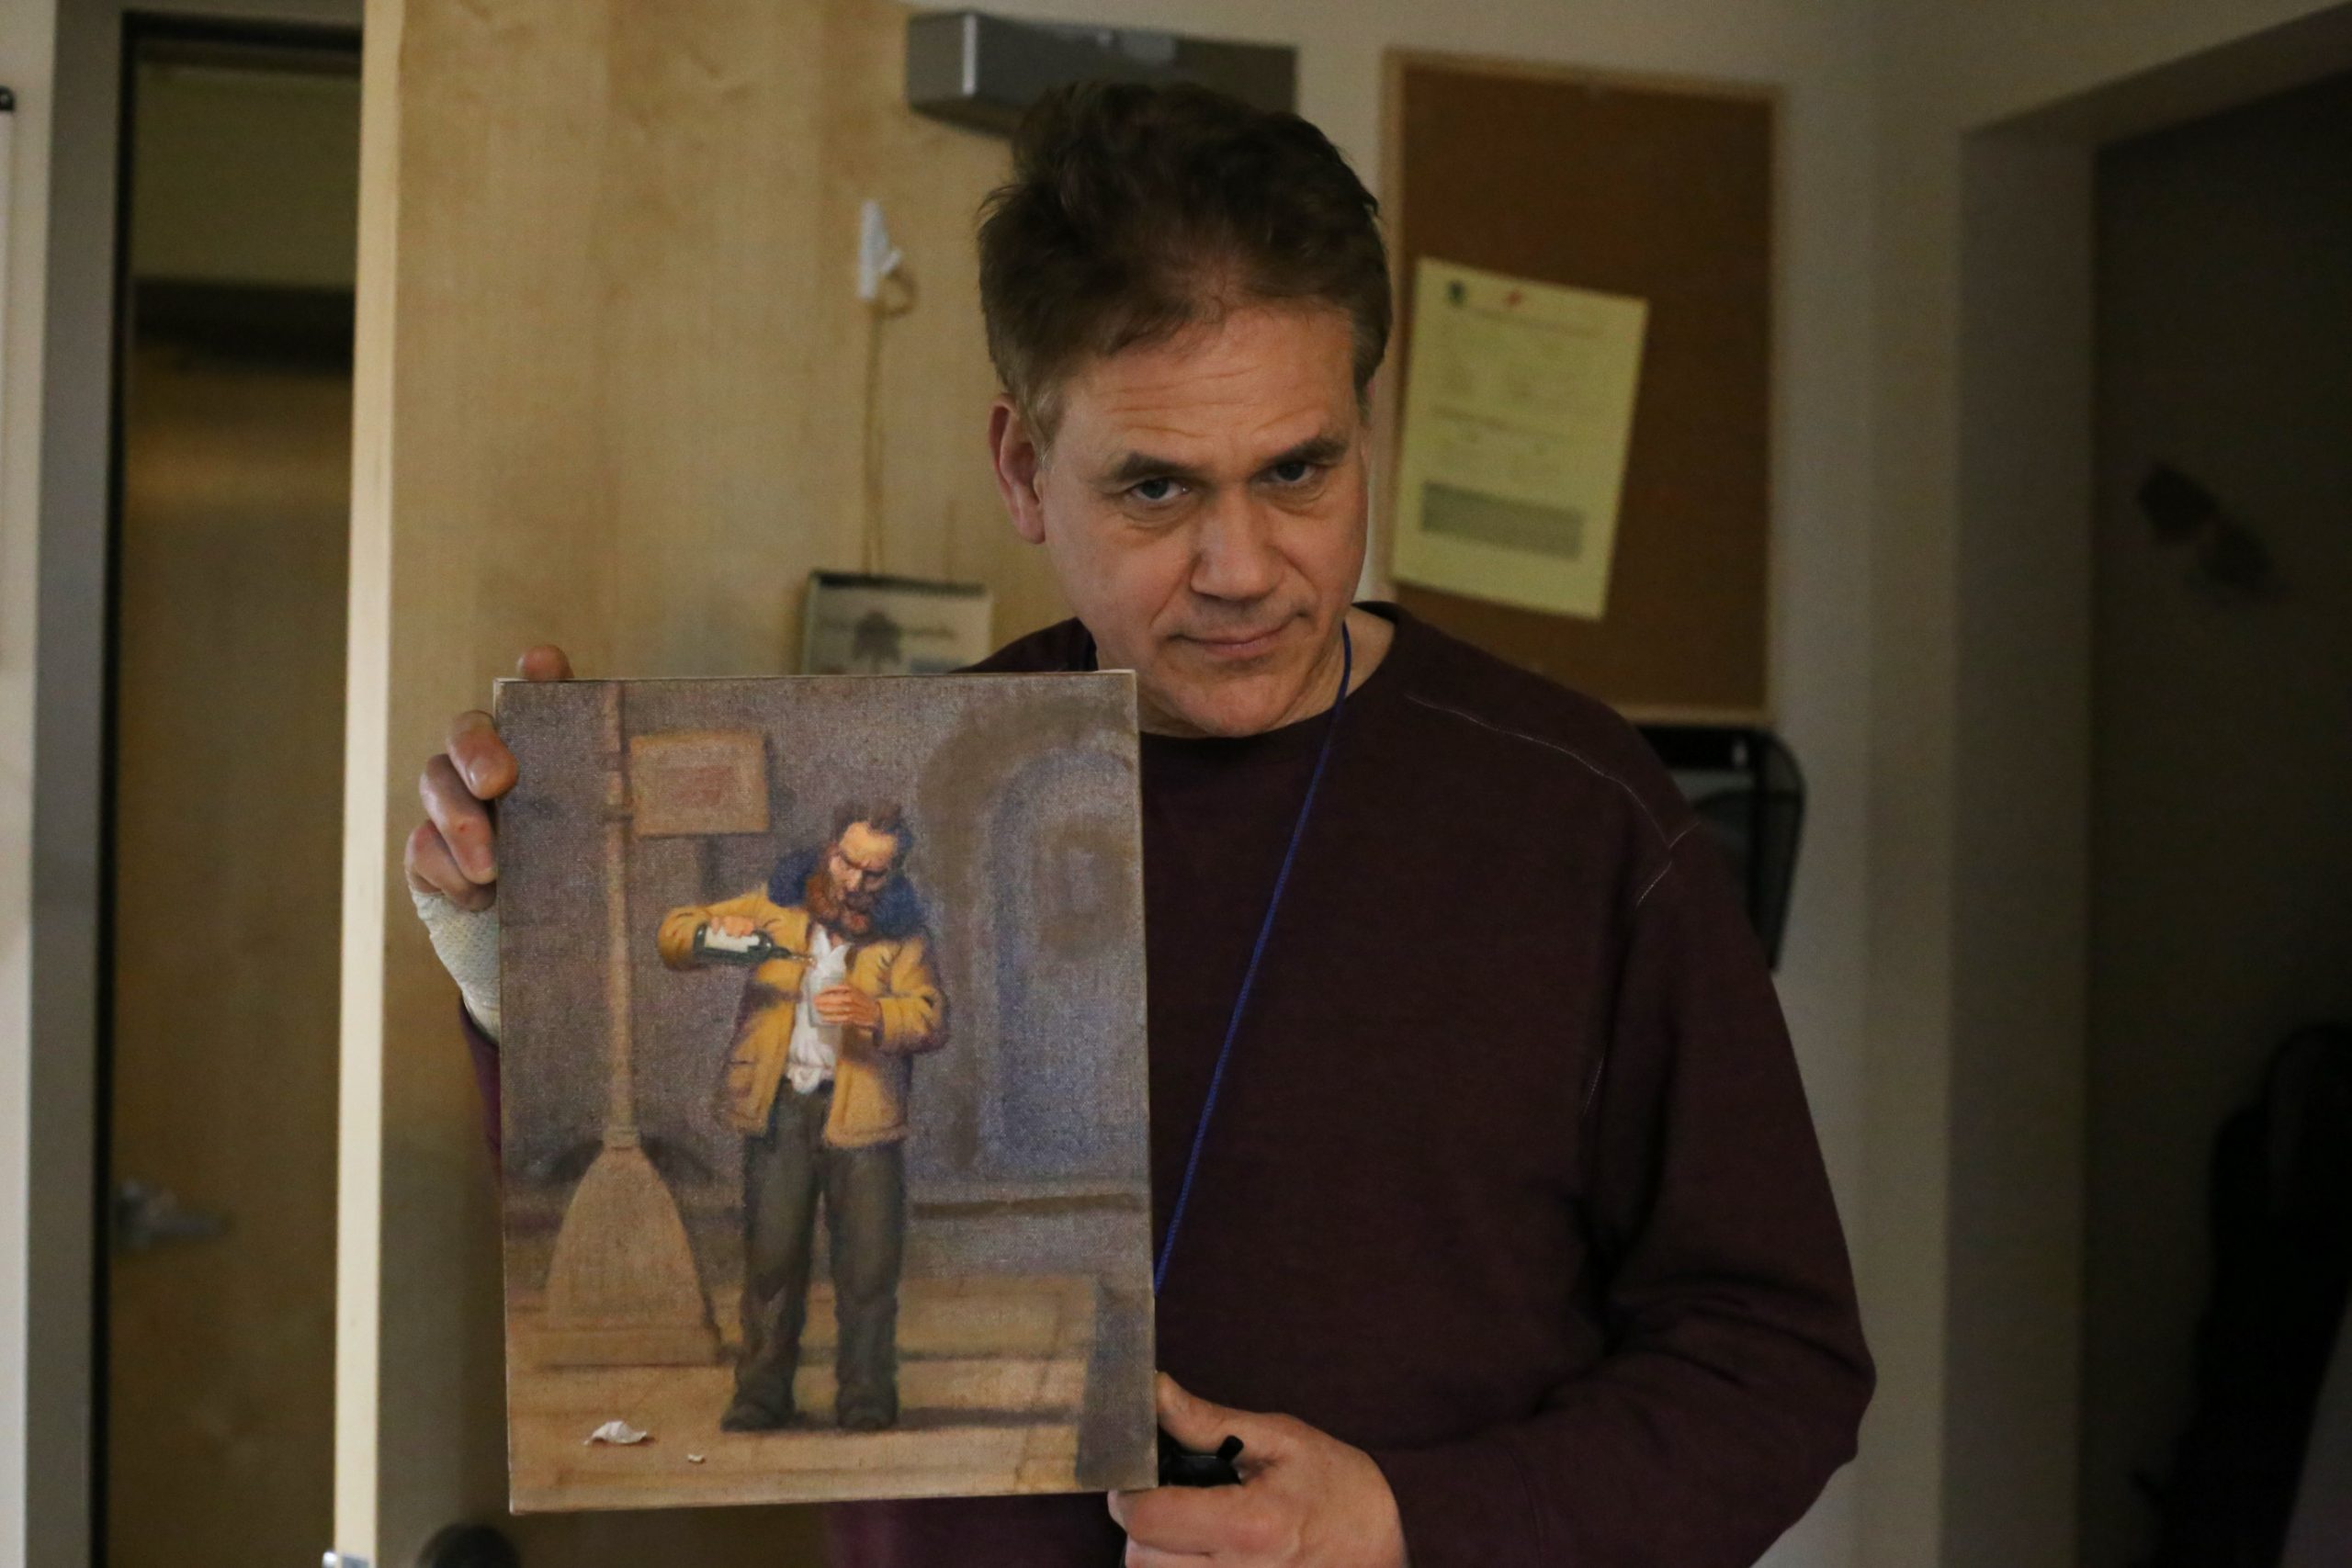 Artist Richard Lithgow poses with a recent painting he made at Blanchet House.